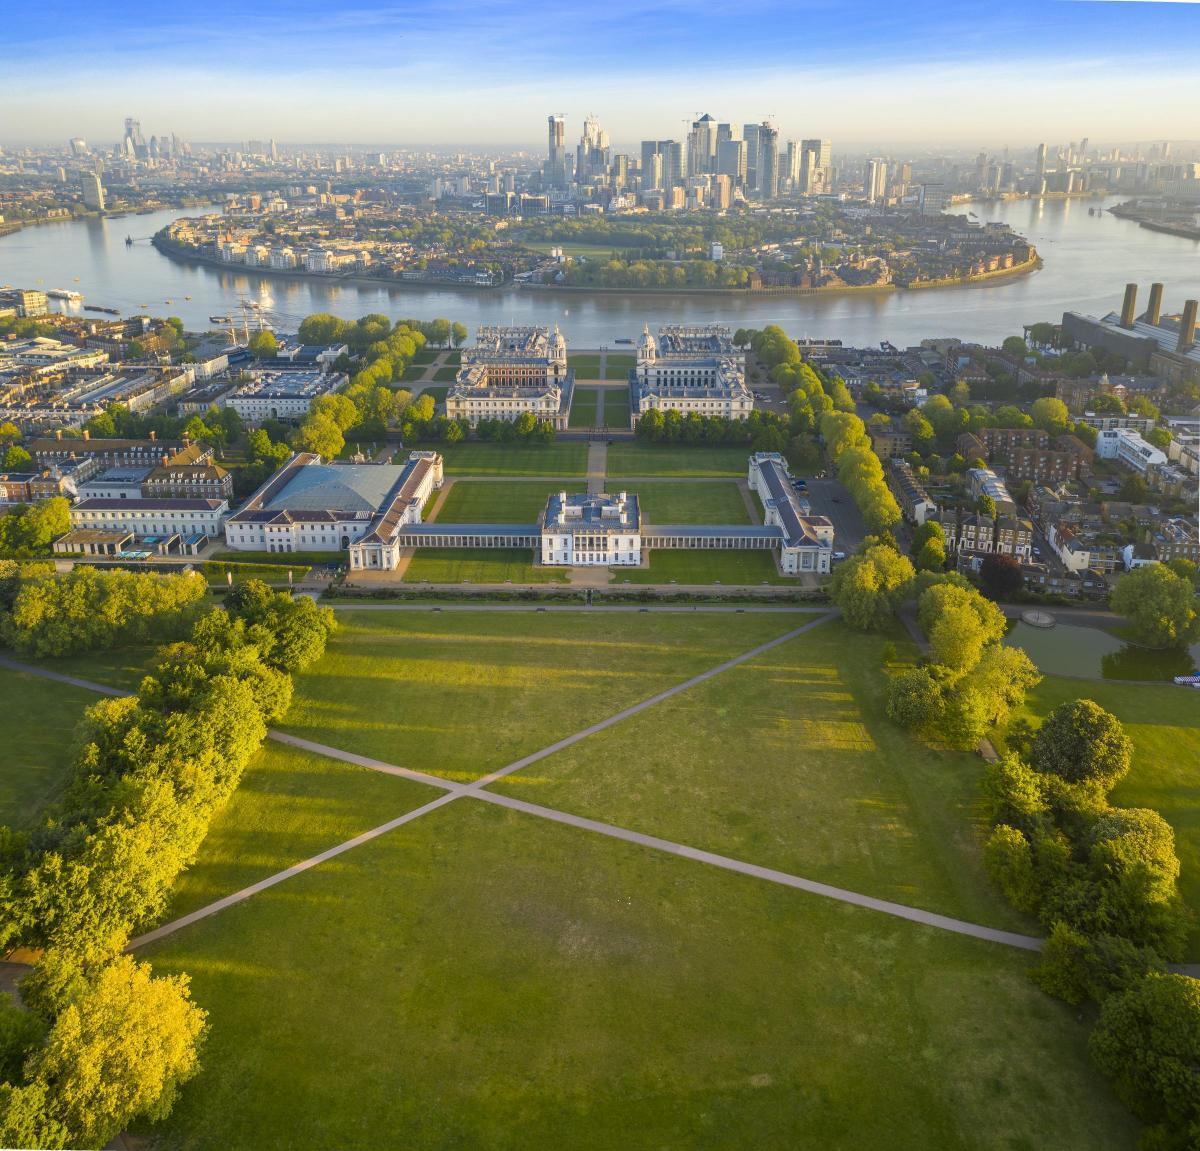 Revised plans for £10m transformation of Greenwich Park | Shopper